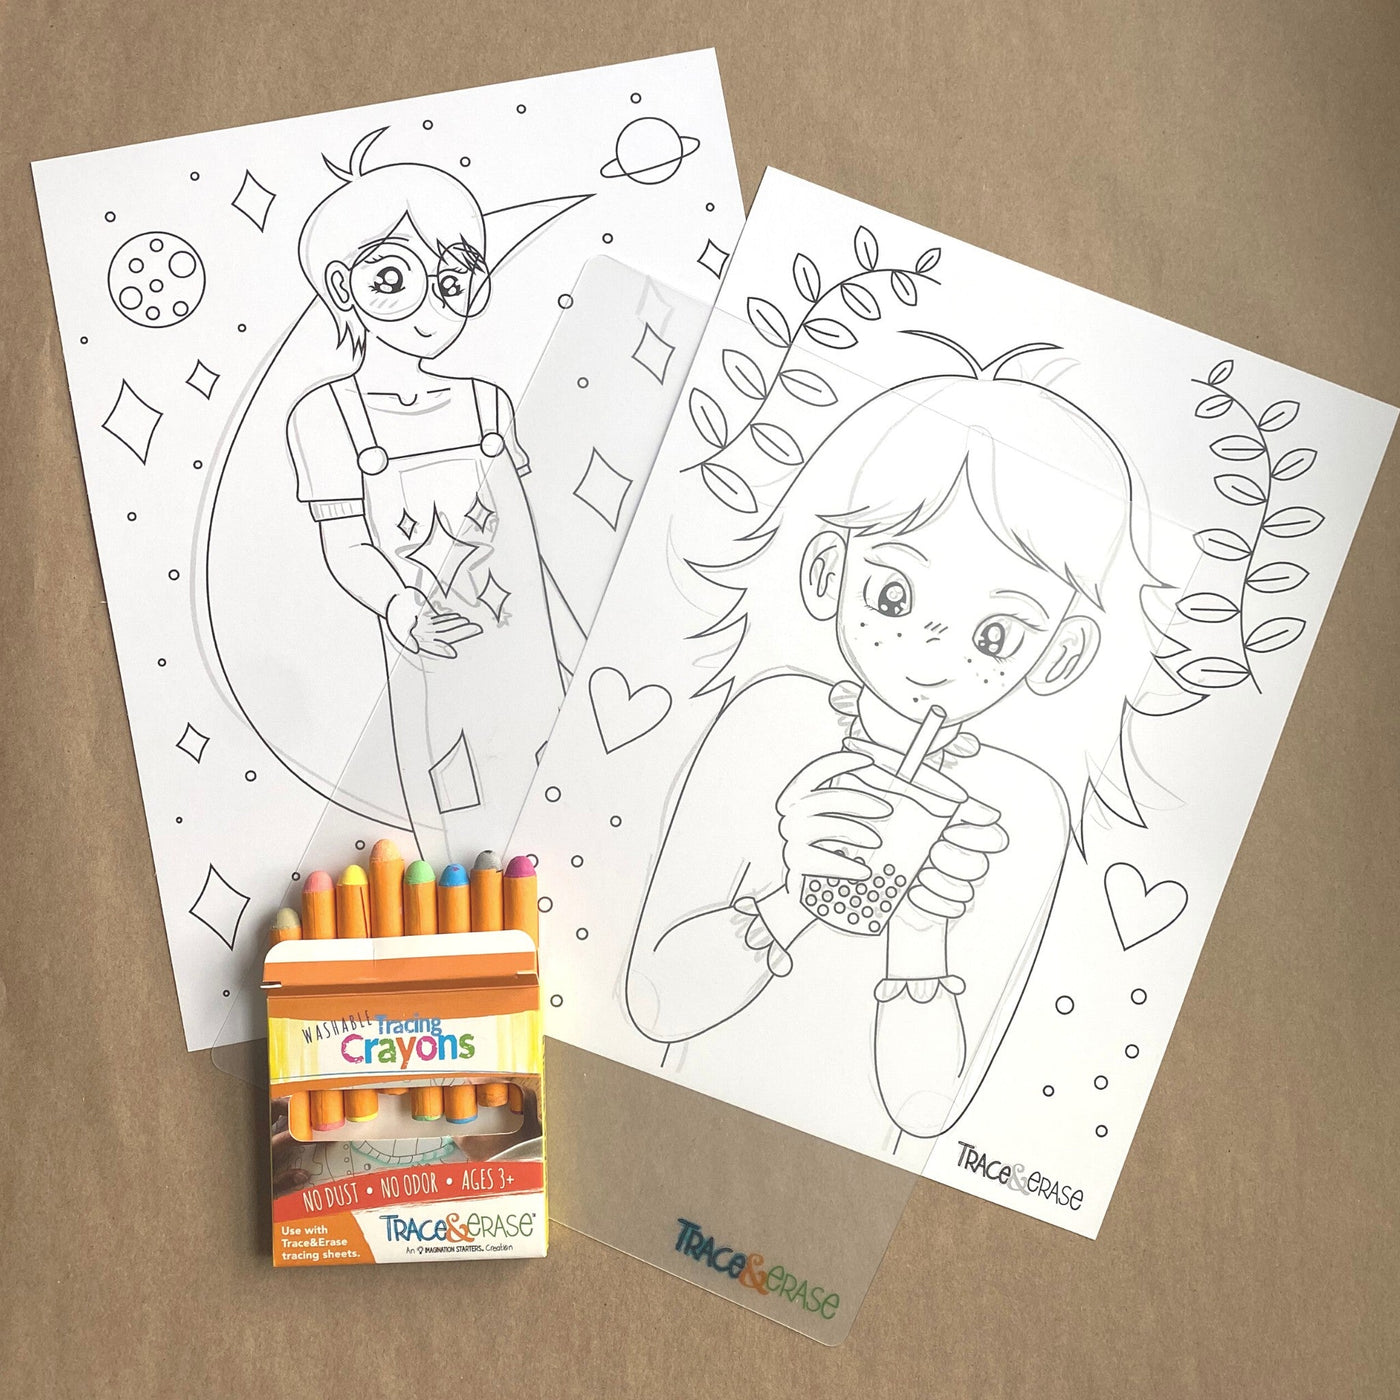 Trace and Erase Anime Colouring Sheets by Imagination Starters